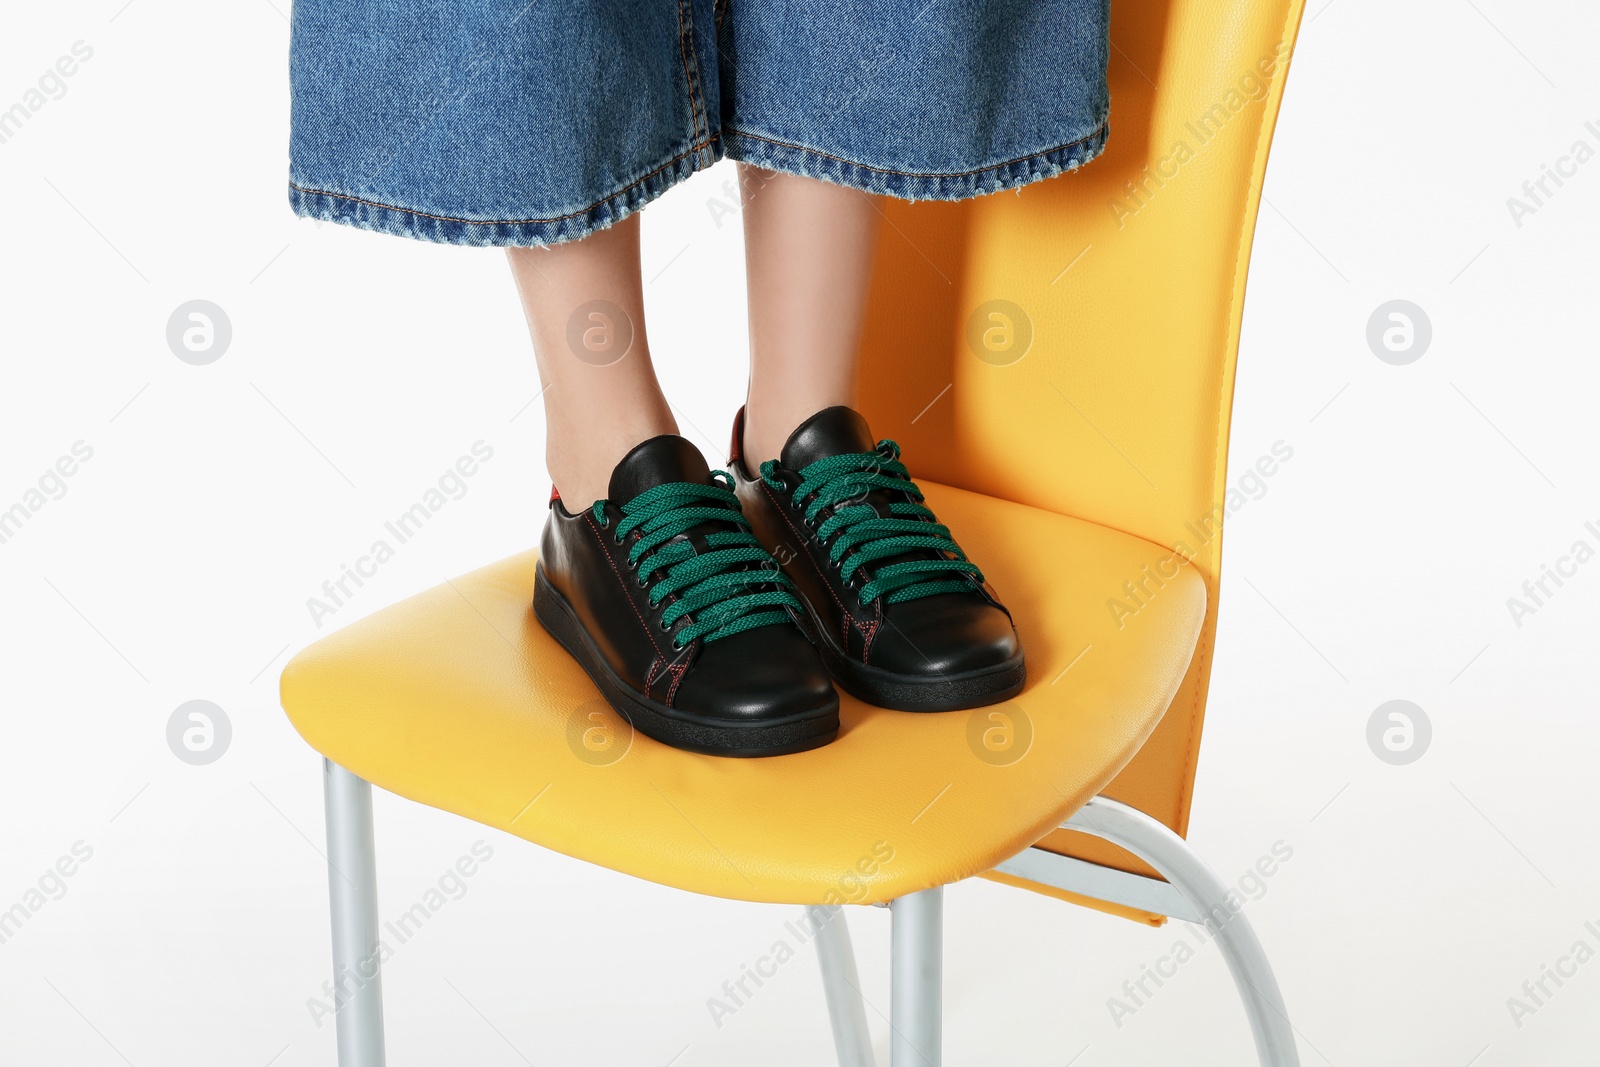 Photo of Woman in stylish shoes standing on chair against white background, closeup